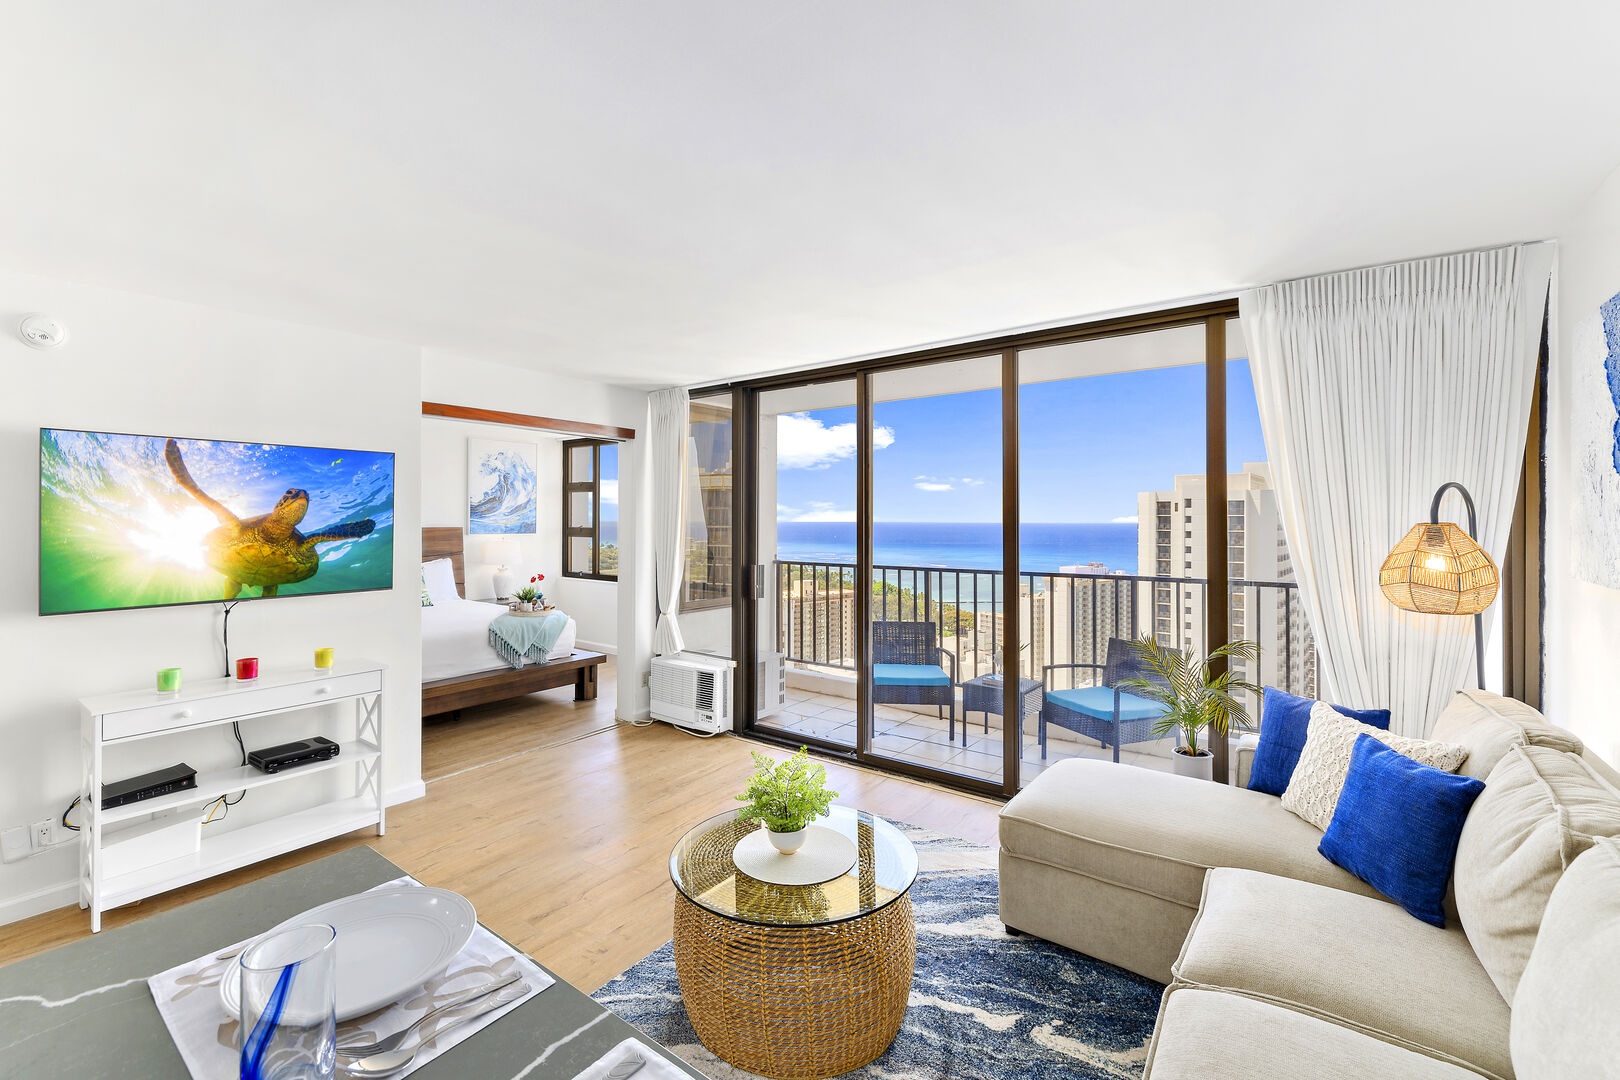 Modern unit, fully renovated. Gorgeous ocean views. Living room with AC and smart cable TV